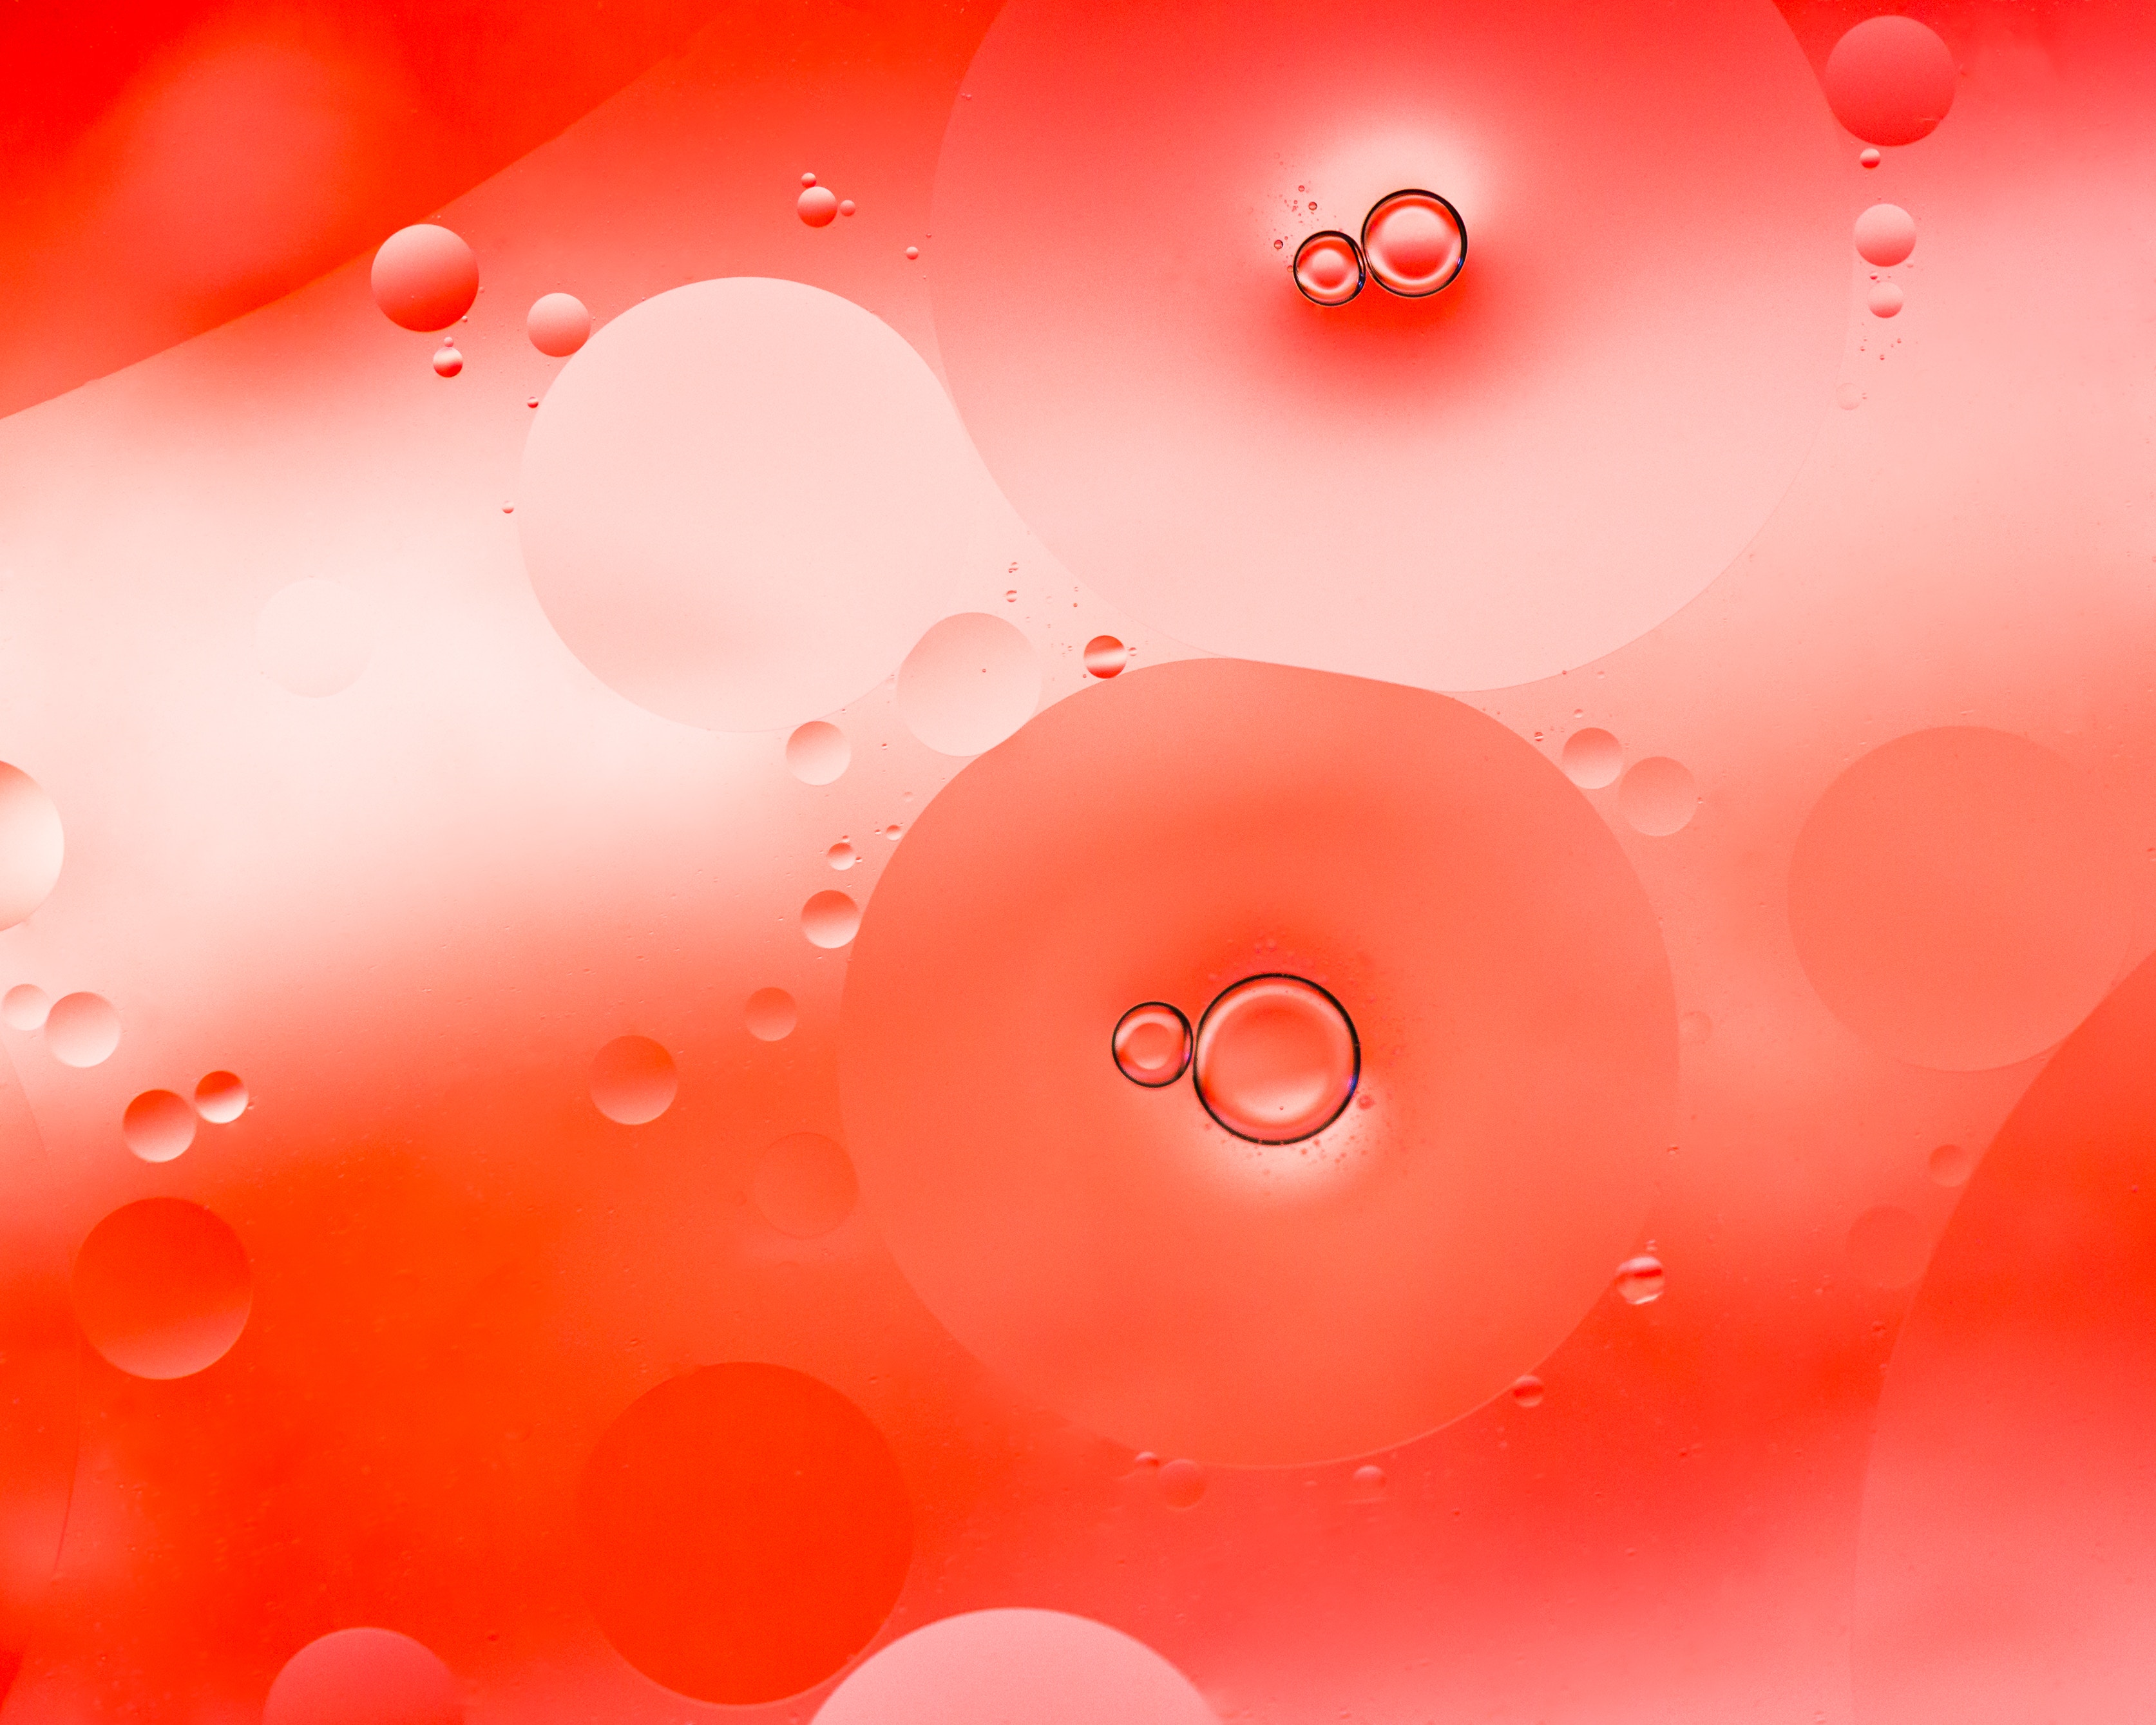 106931 download wallpaper circles, bubbles, macro, liquid screensavers and pictures for free